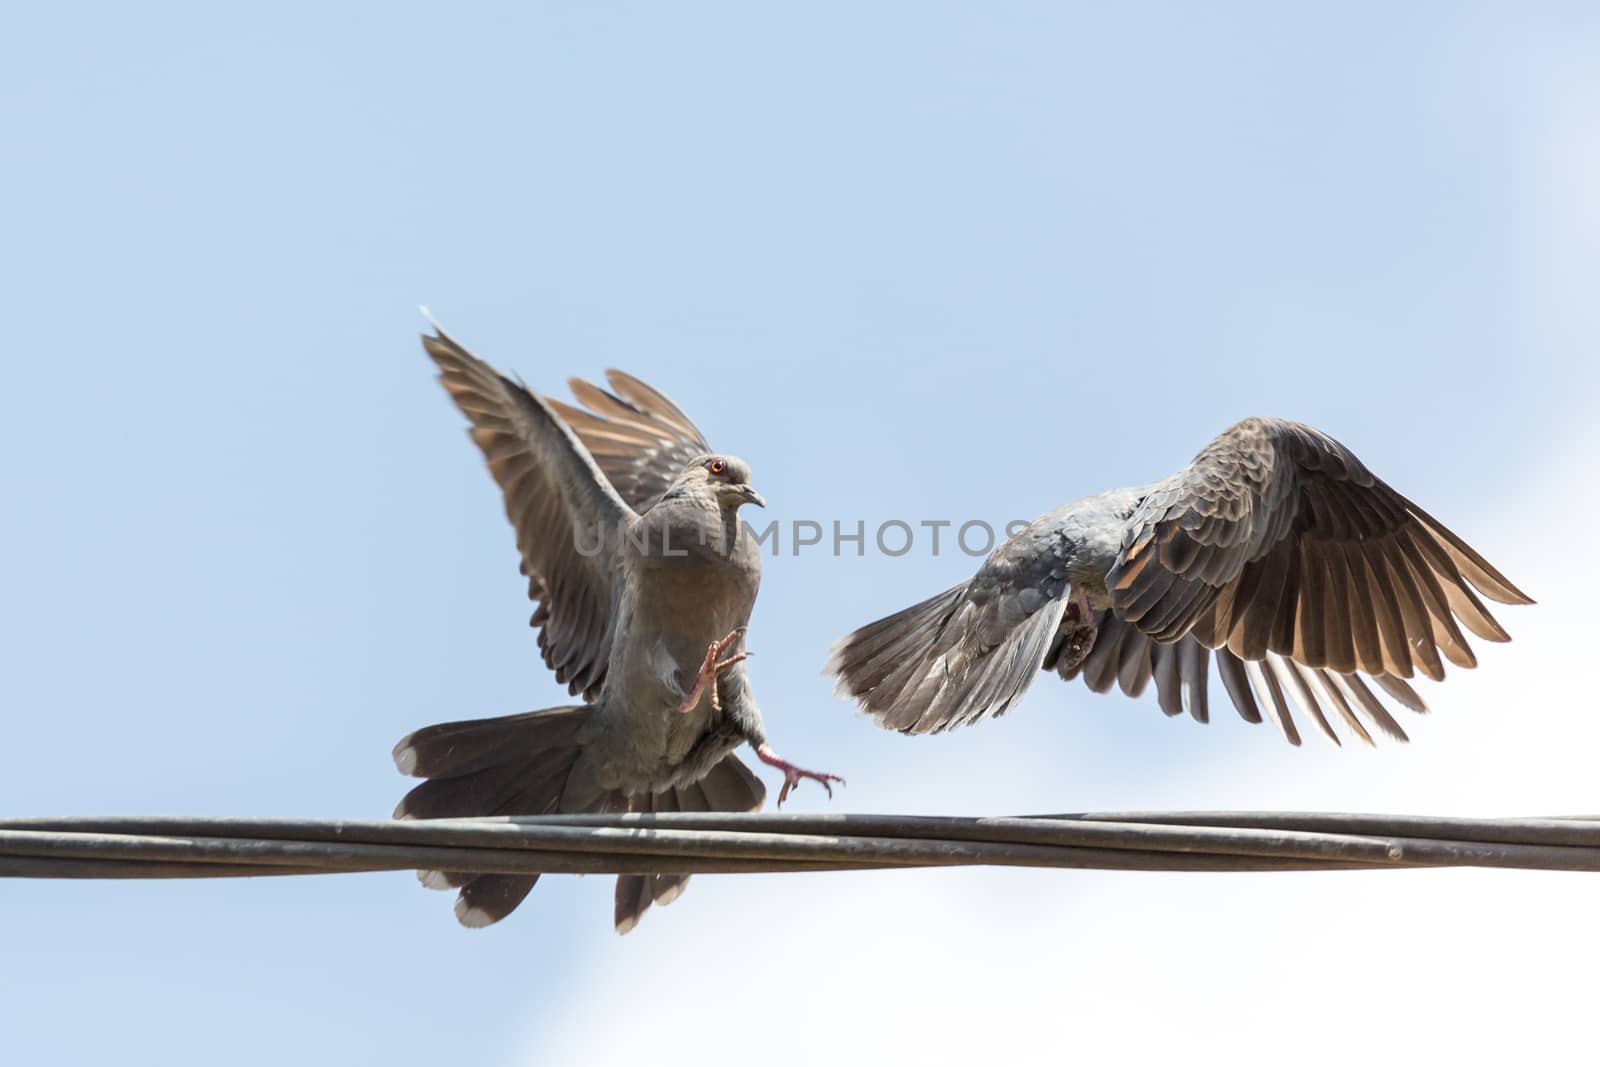 pigeon fight by derejeb